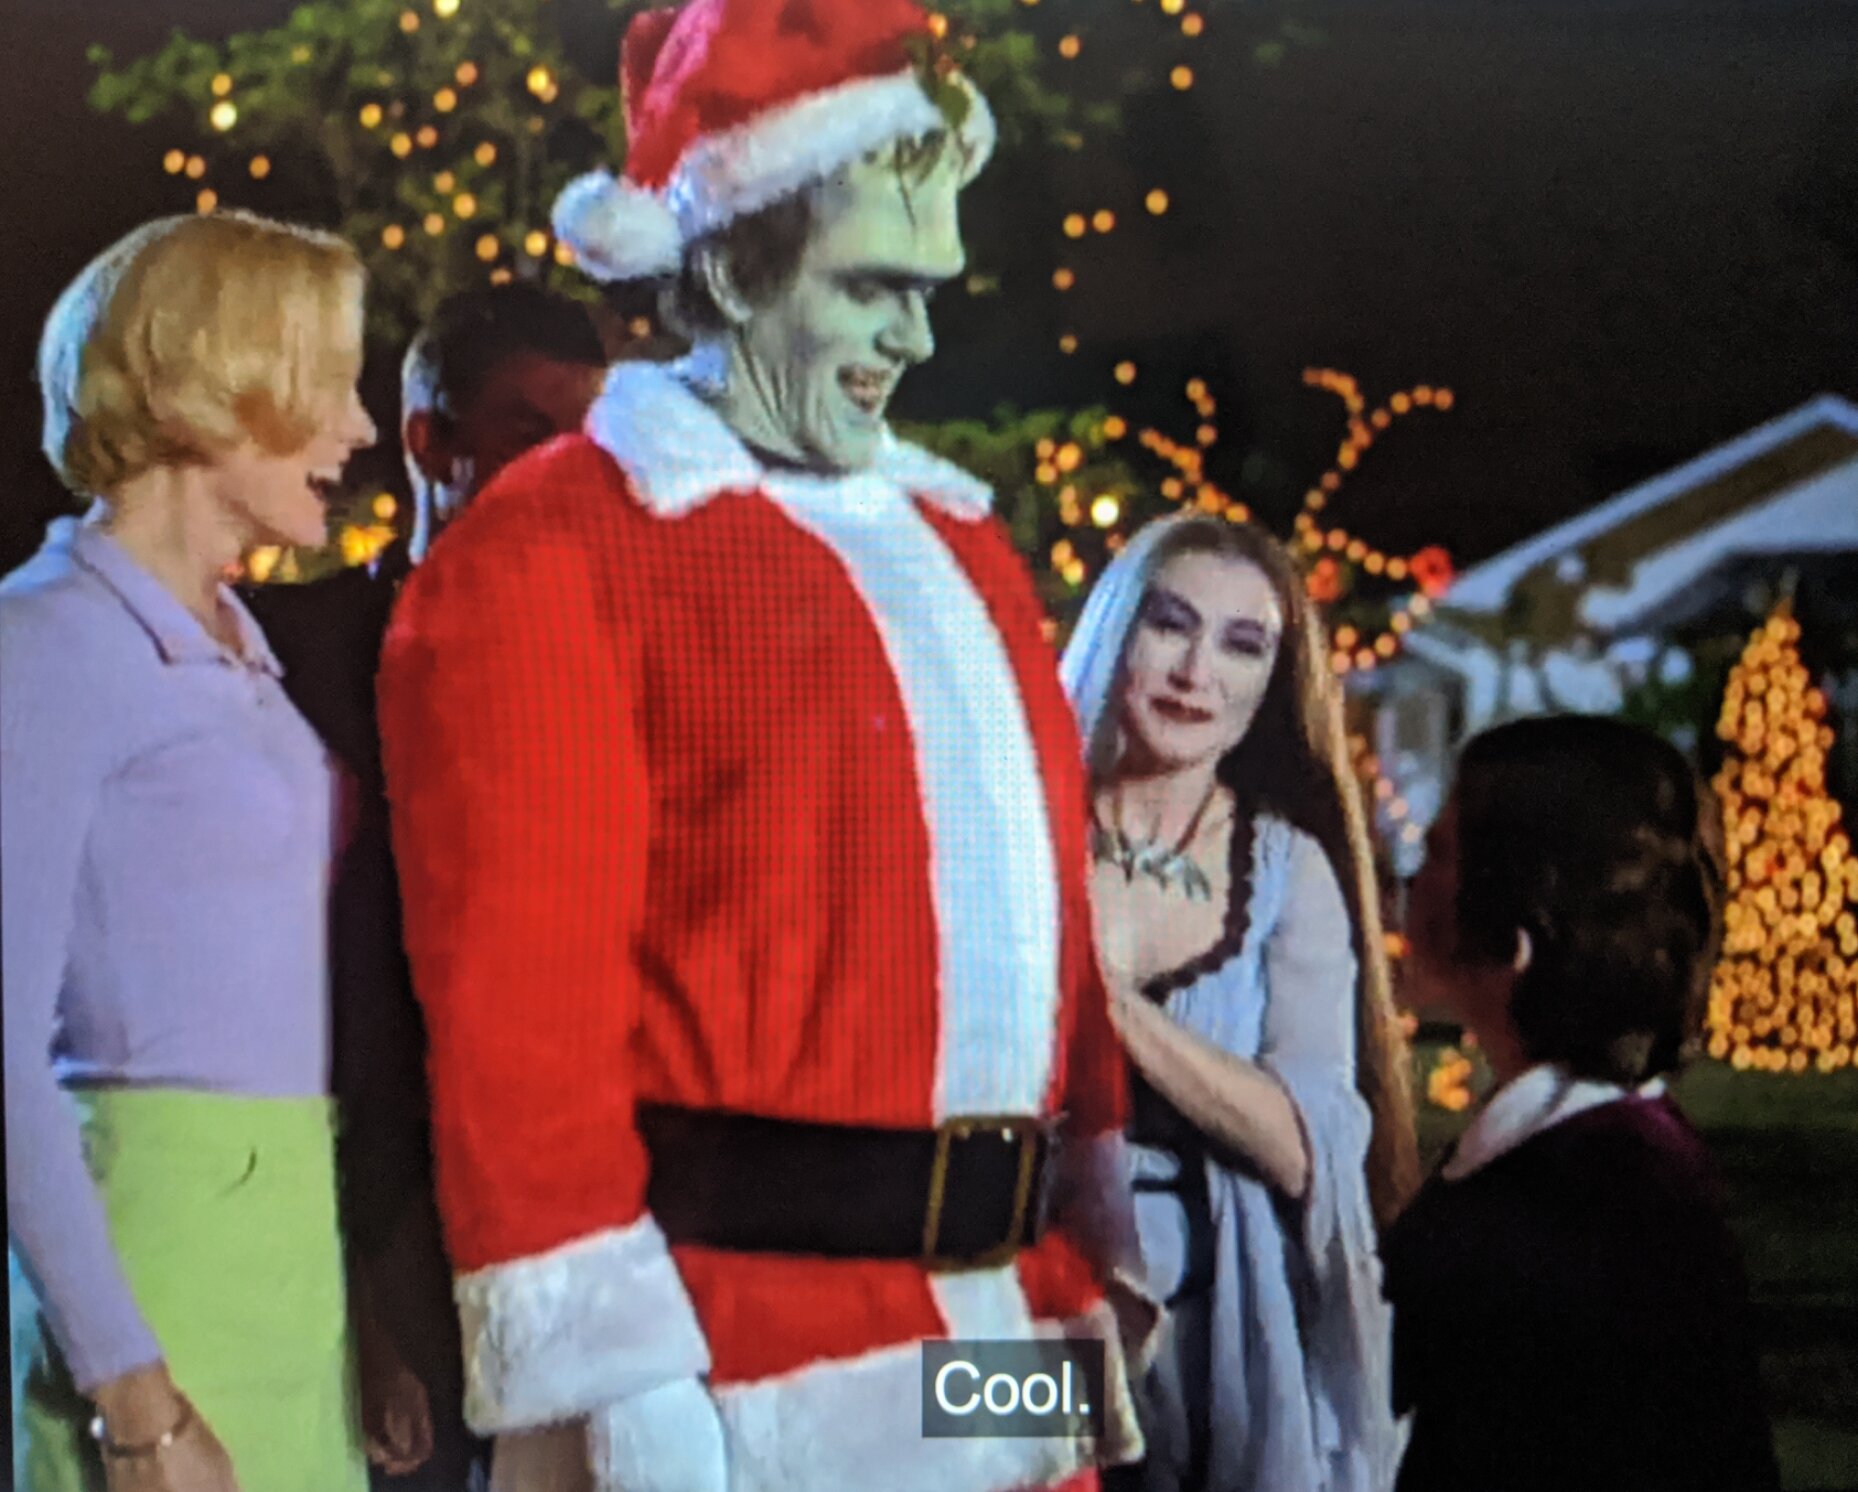 Rainbow Christmas 2019 The Munsters Scary Little Christmas A Horny Holiday Film For the Whole Family — Gayly Dreadful -- Bursting out of your closet with the latest horror reviews picture